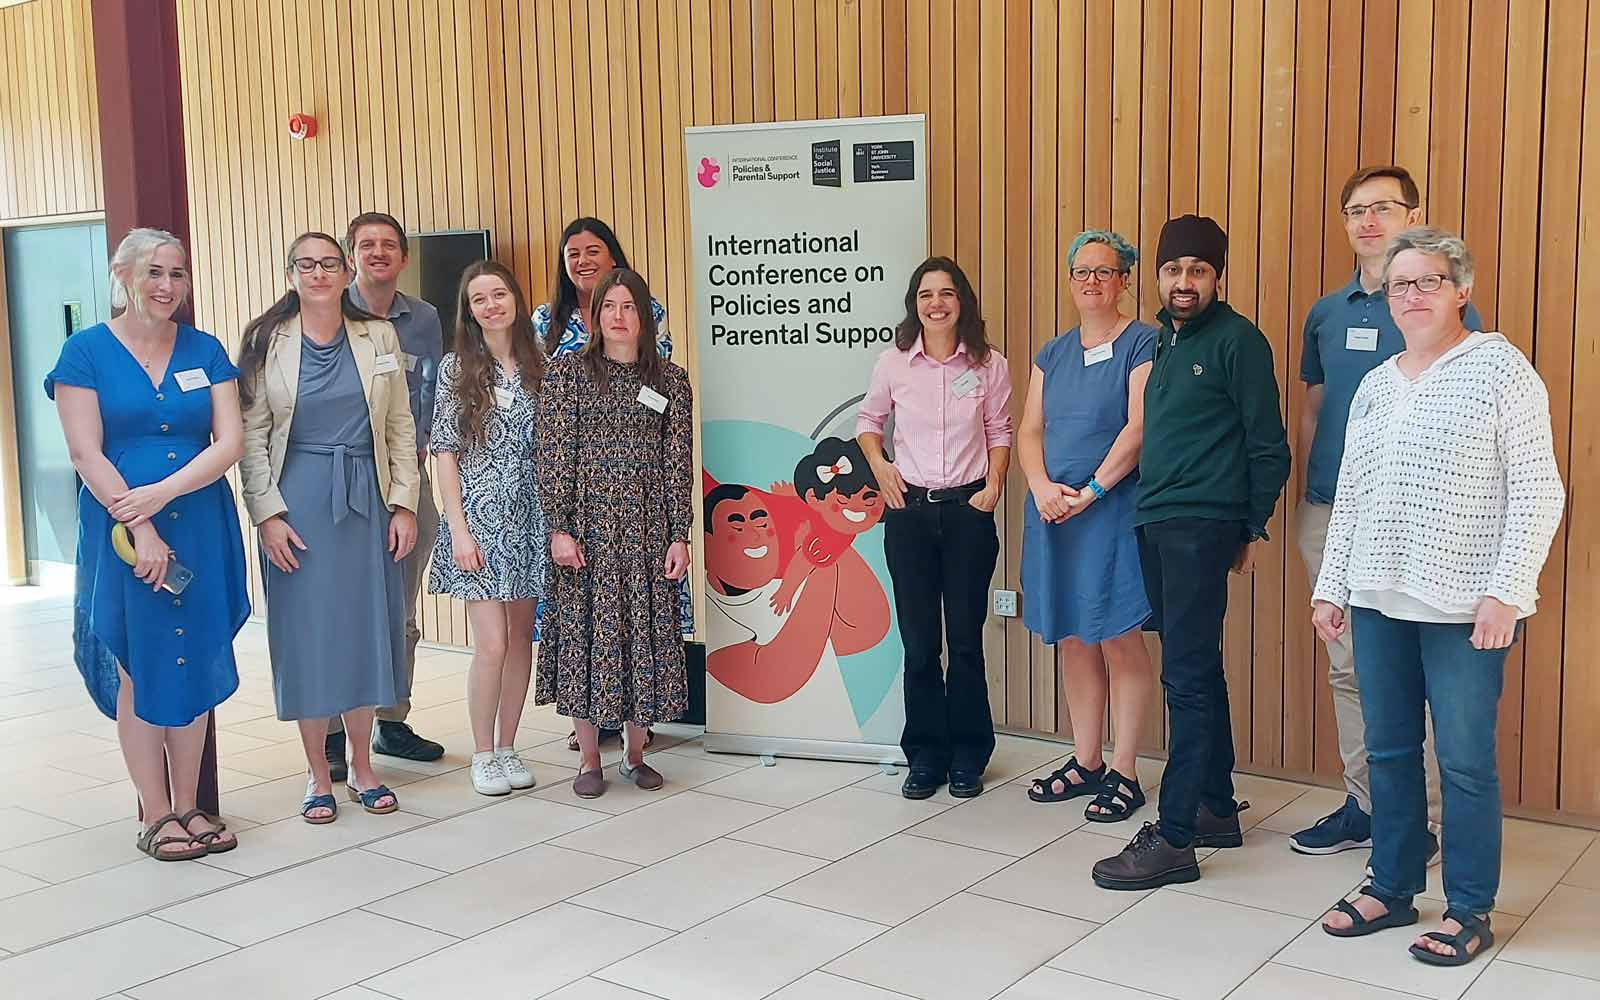 Attendees of the 2023 International Conference on Policies and Parental Support standing in front of the conference banner